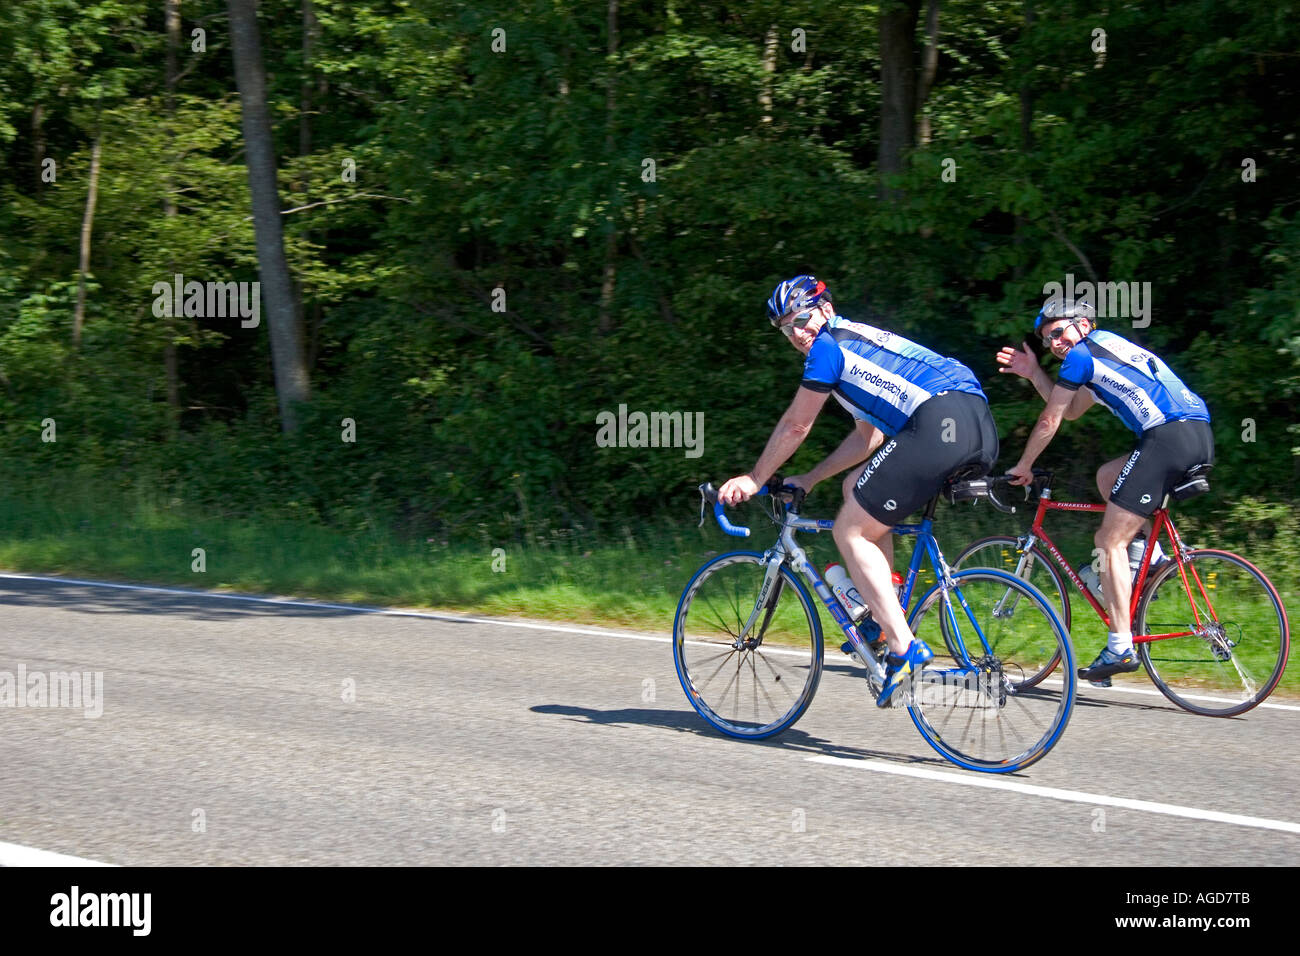 Bicyclists in the German countryside. Stock Photo